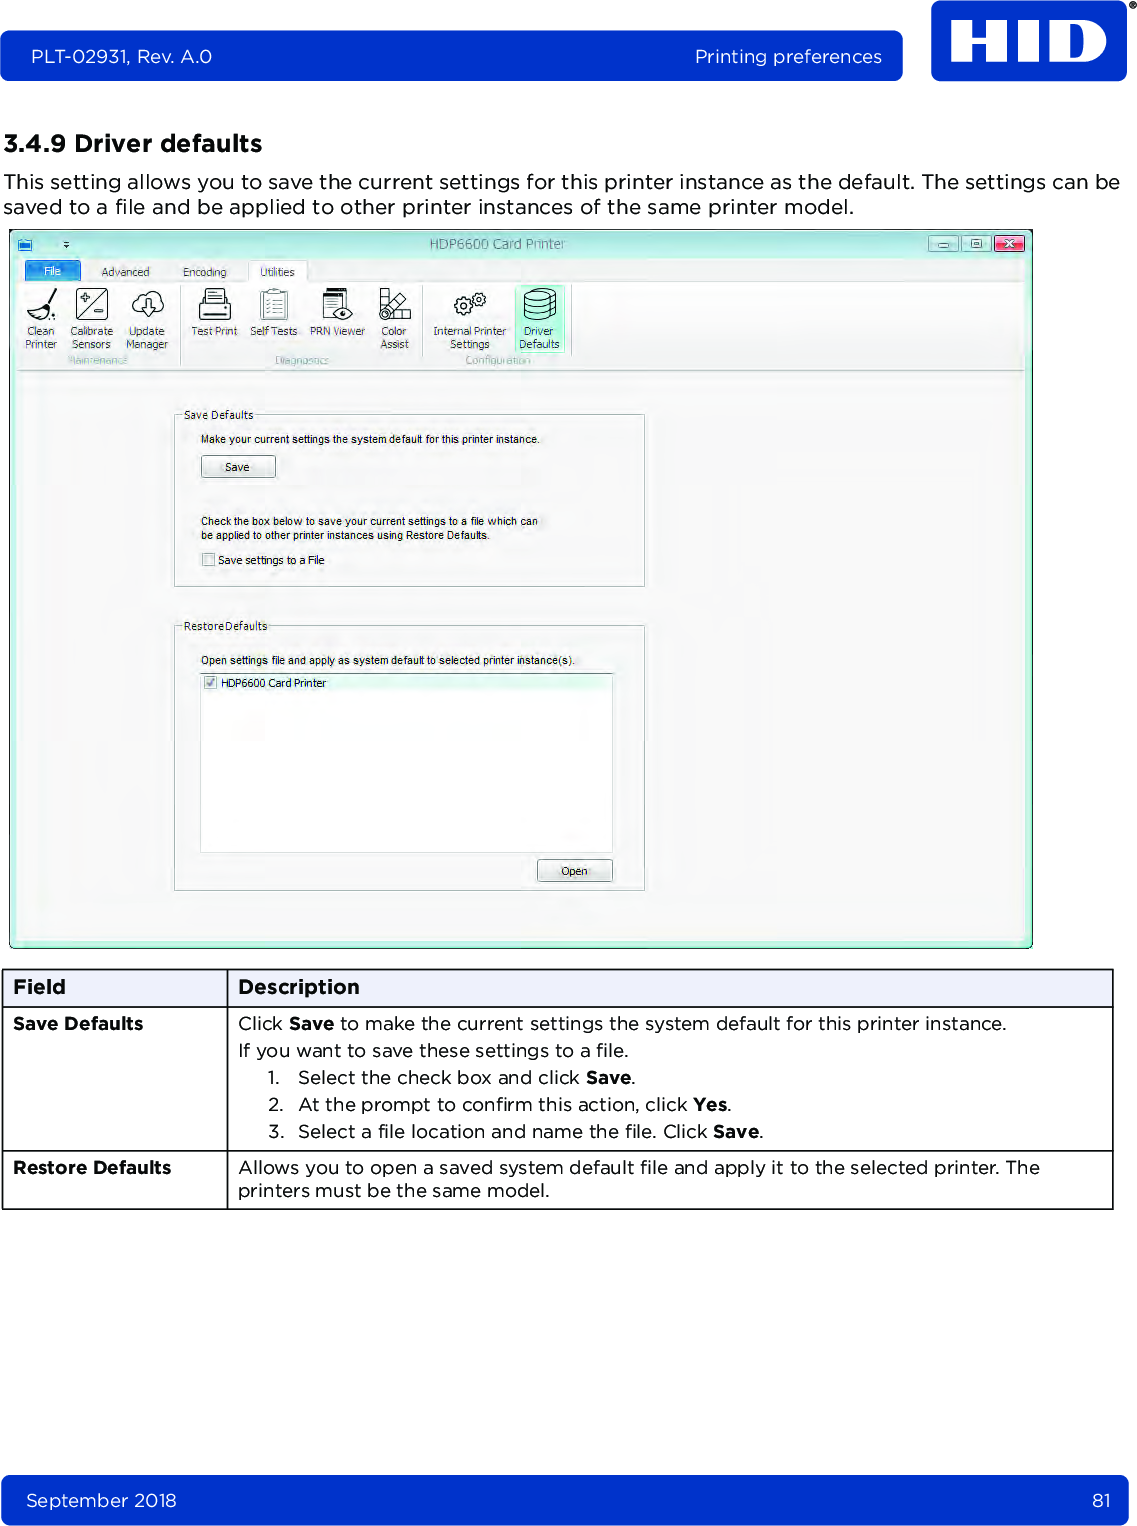 September 2018 81PLT-02931, Rev. A.0 Printing preferences3.4.9 Driver defaultsThis setting allows you to save the current settings for this printer instance as the default. The settings can be saved to a file and be applied to other printer instances of the same printer model.  Field DescriptionSave Defaults Click Save to make the current settings the system default for this printer instance. If you want to save these settings to a file.1. Select the check box and click Save. 2. At the prompt to confirm this action, click Yes.3. Select a file location and name the file. Click Save.Restore Defaults Allows you to open a saved system default file and apply it to the selected printer. The printers must be the same model.